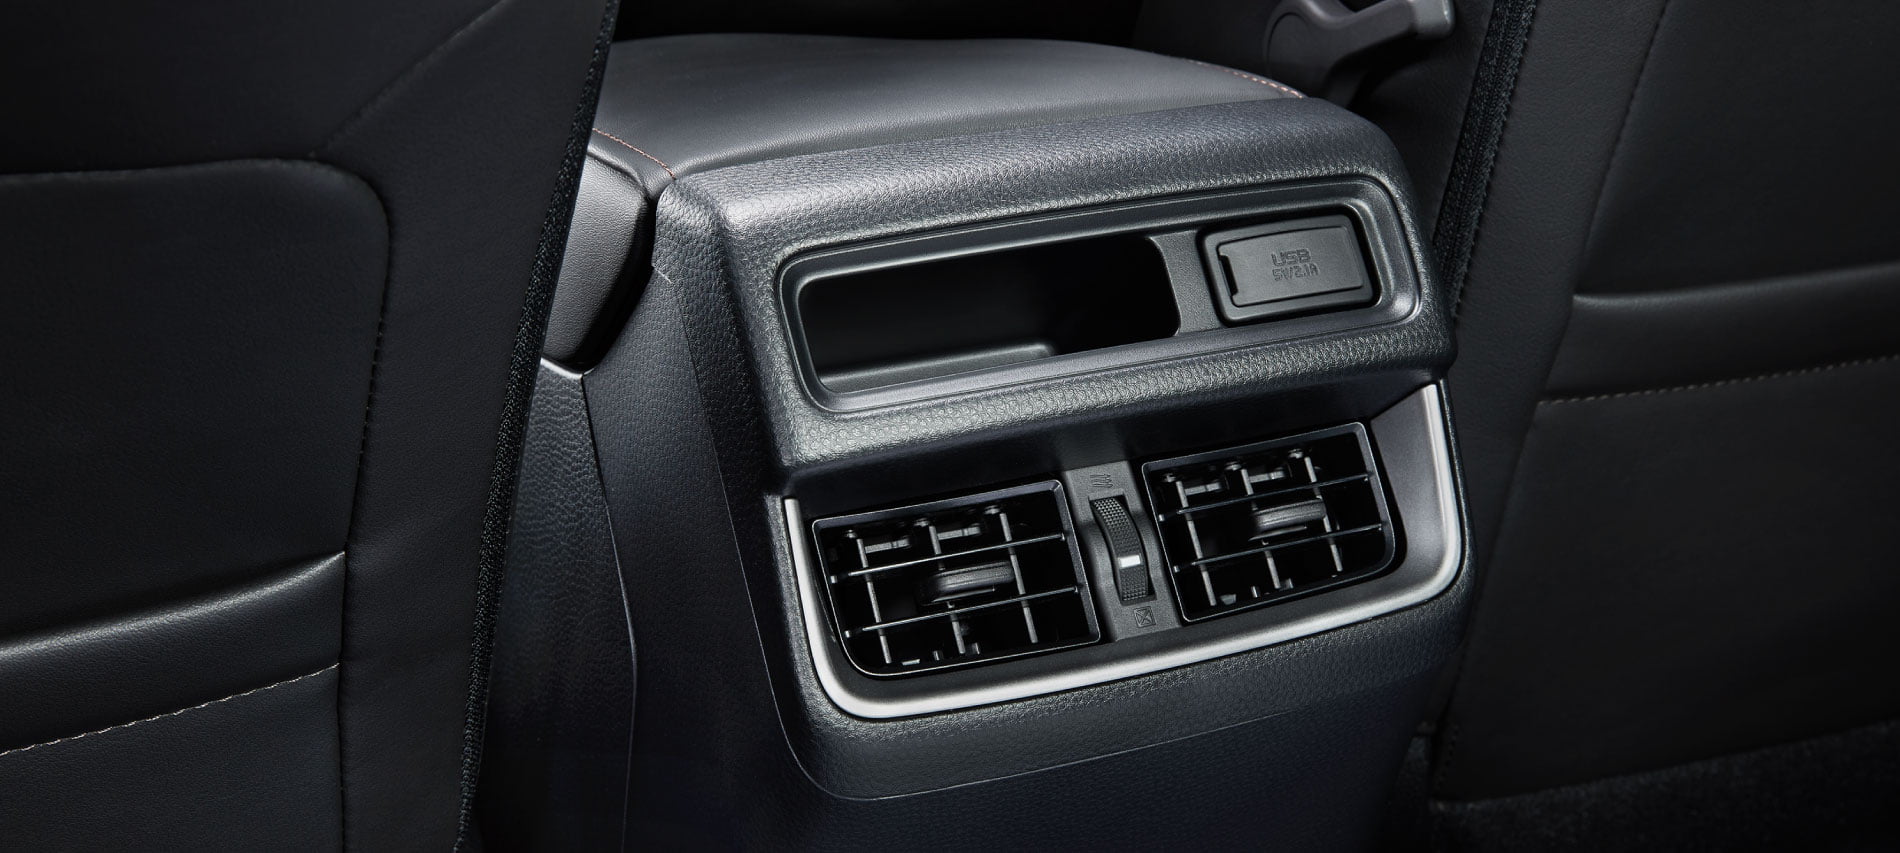 REAR VENTS WITH USB CHARGING PORT